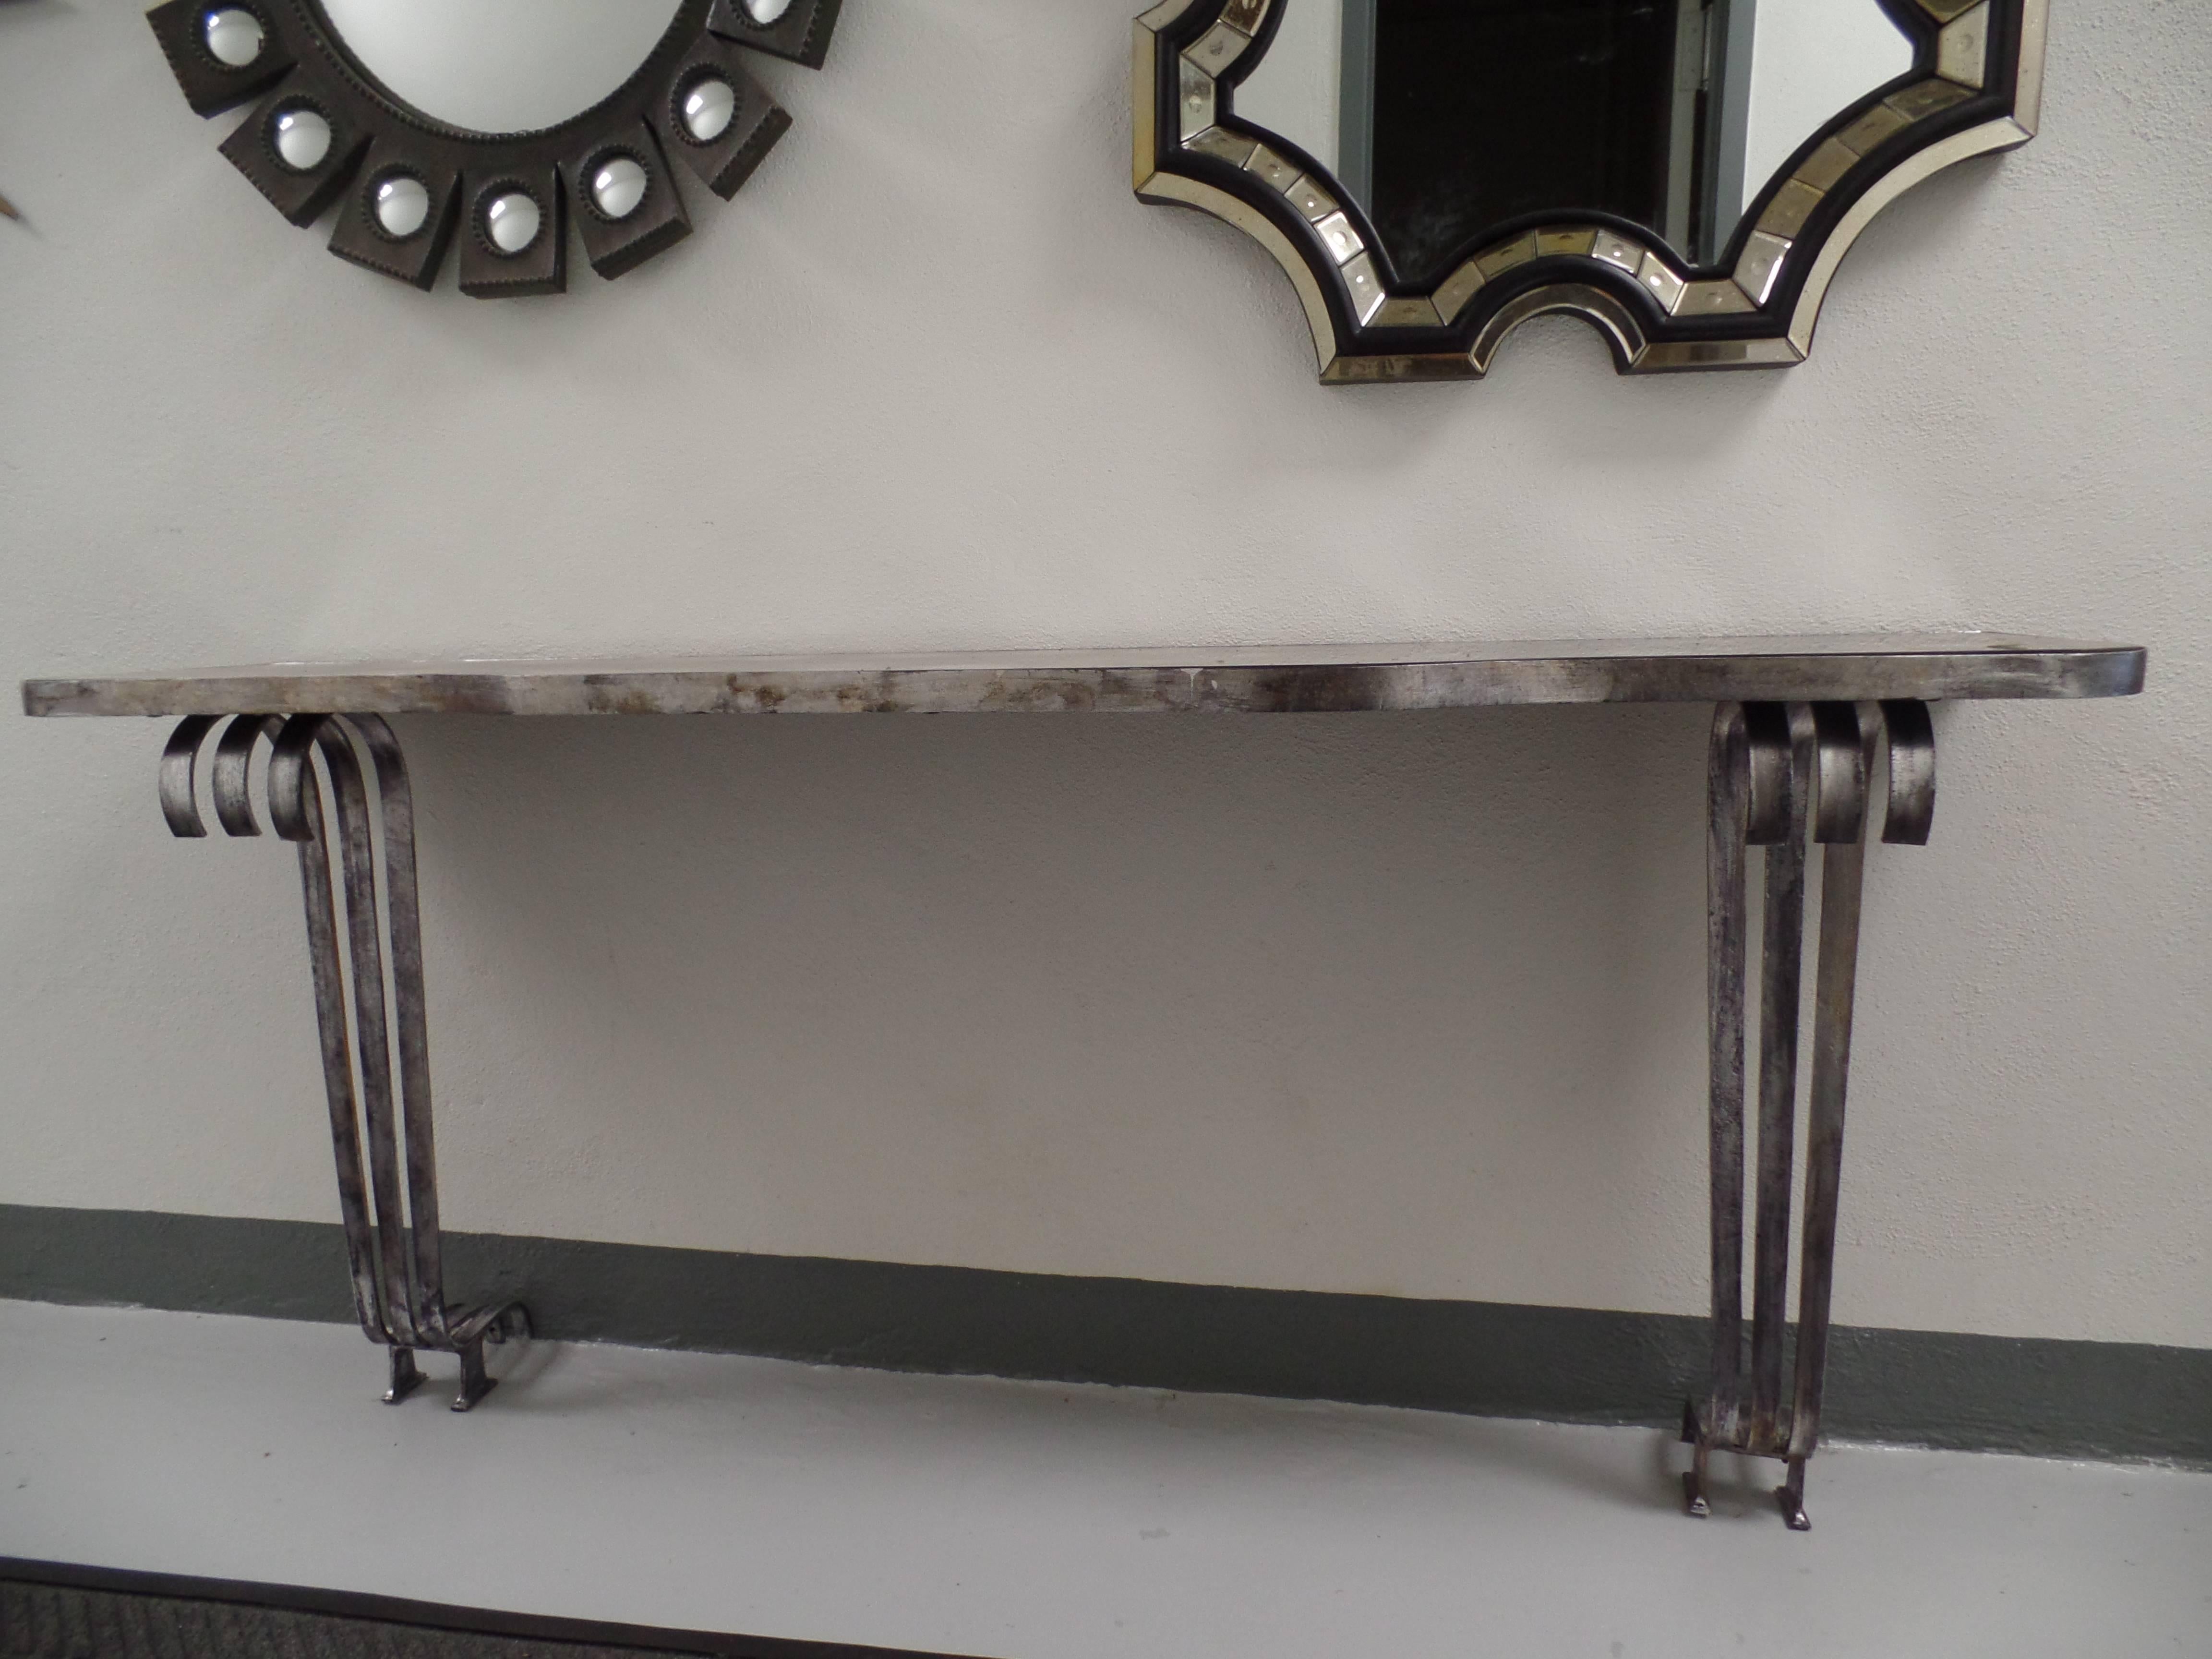 Rare, elegant, large French Mid-Century 1930 modernist / late Art Deco wrought iron console attributed to Raymond Subes. The console is emblematic of Subes's use of soft, curving, sensuous forms and an effortless sense of balance and harmony. The